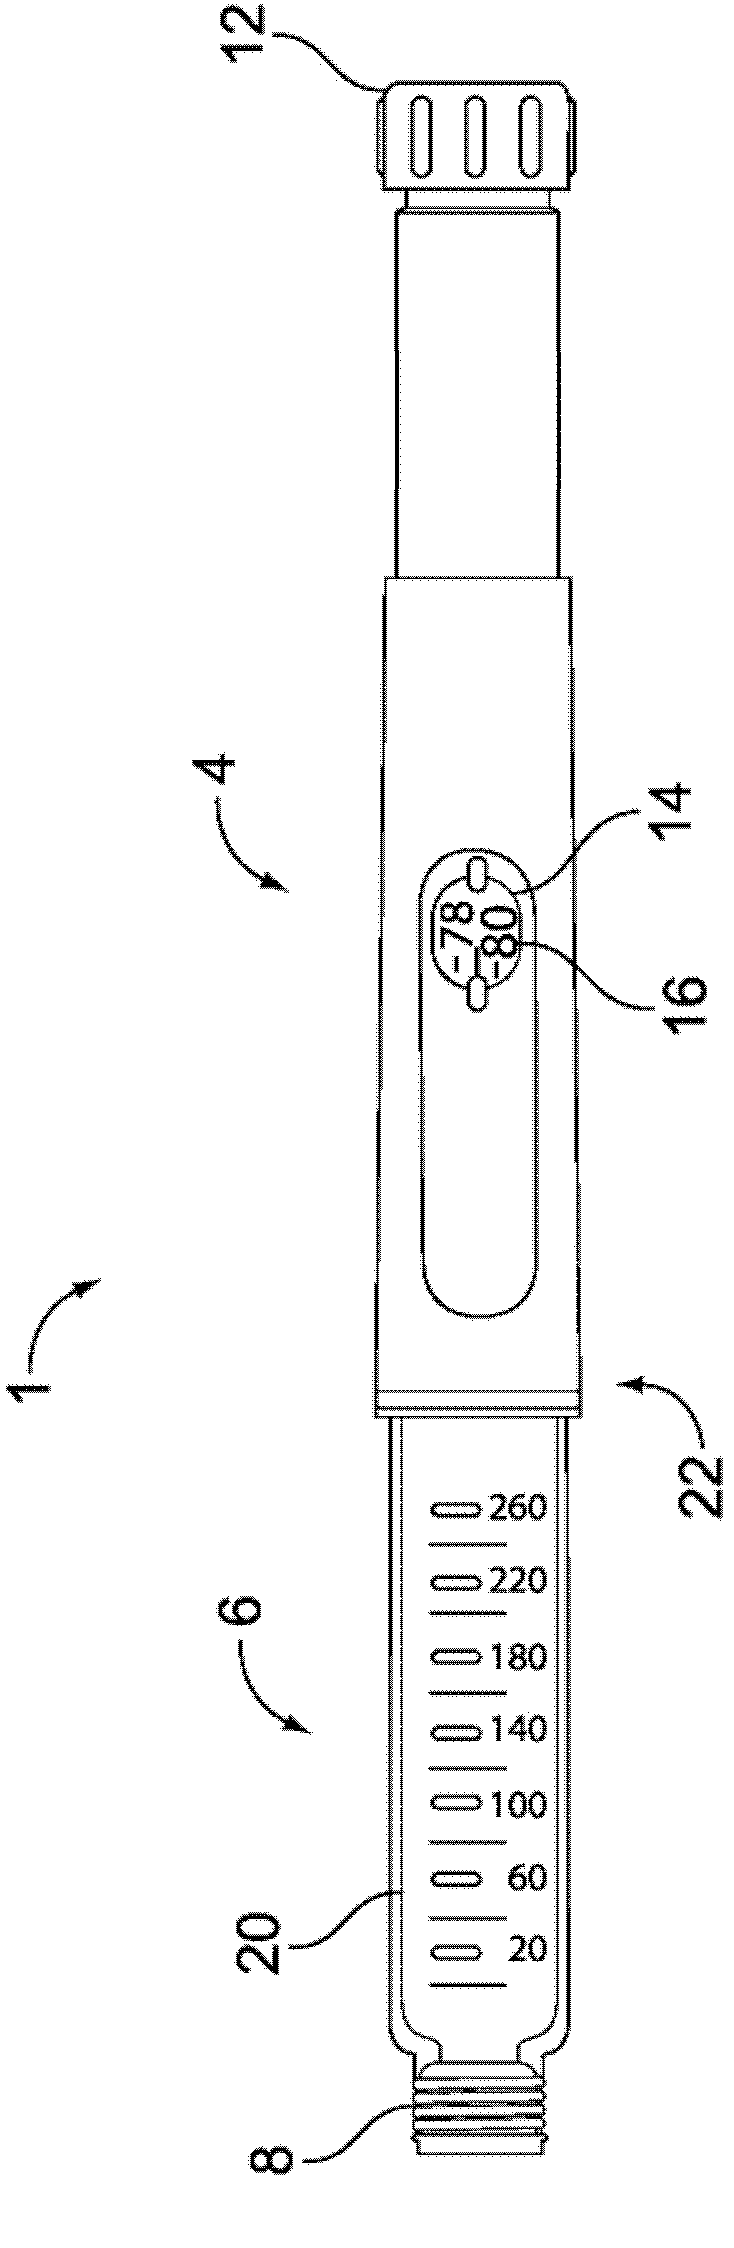 Drug delivery dose setting mechanism with variable maximum dose